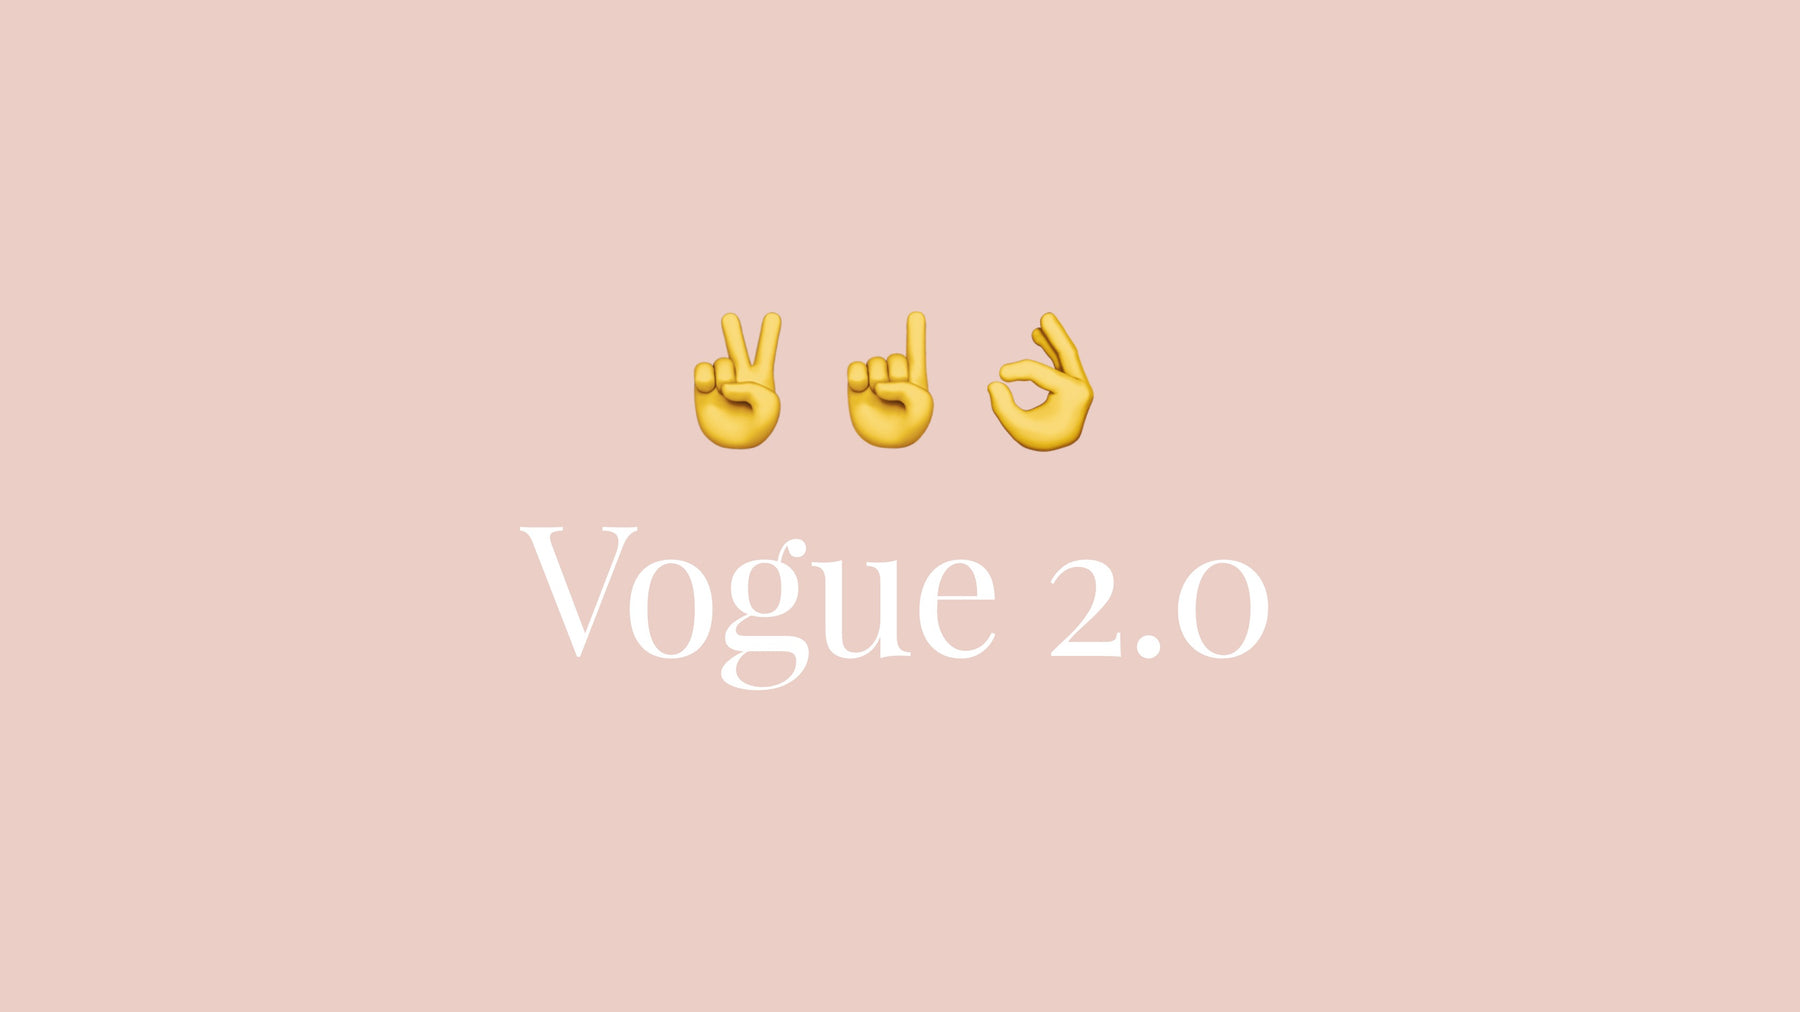 Vogue 2.0: A massive update to our lookbook-style Shopify theme